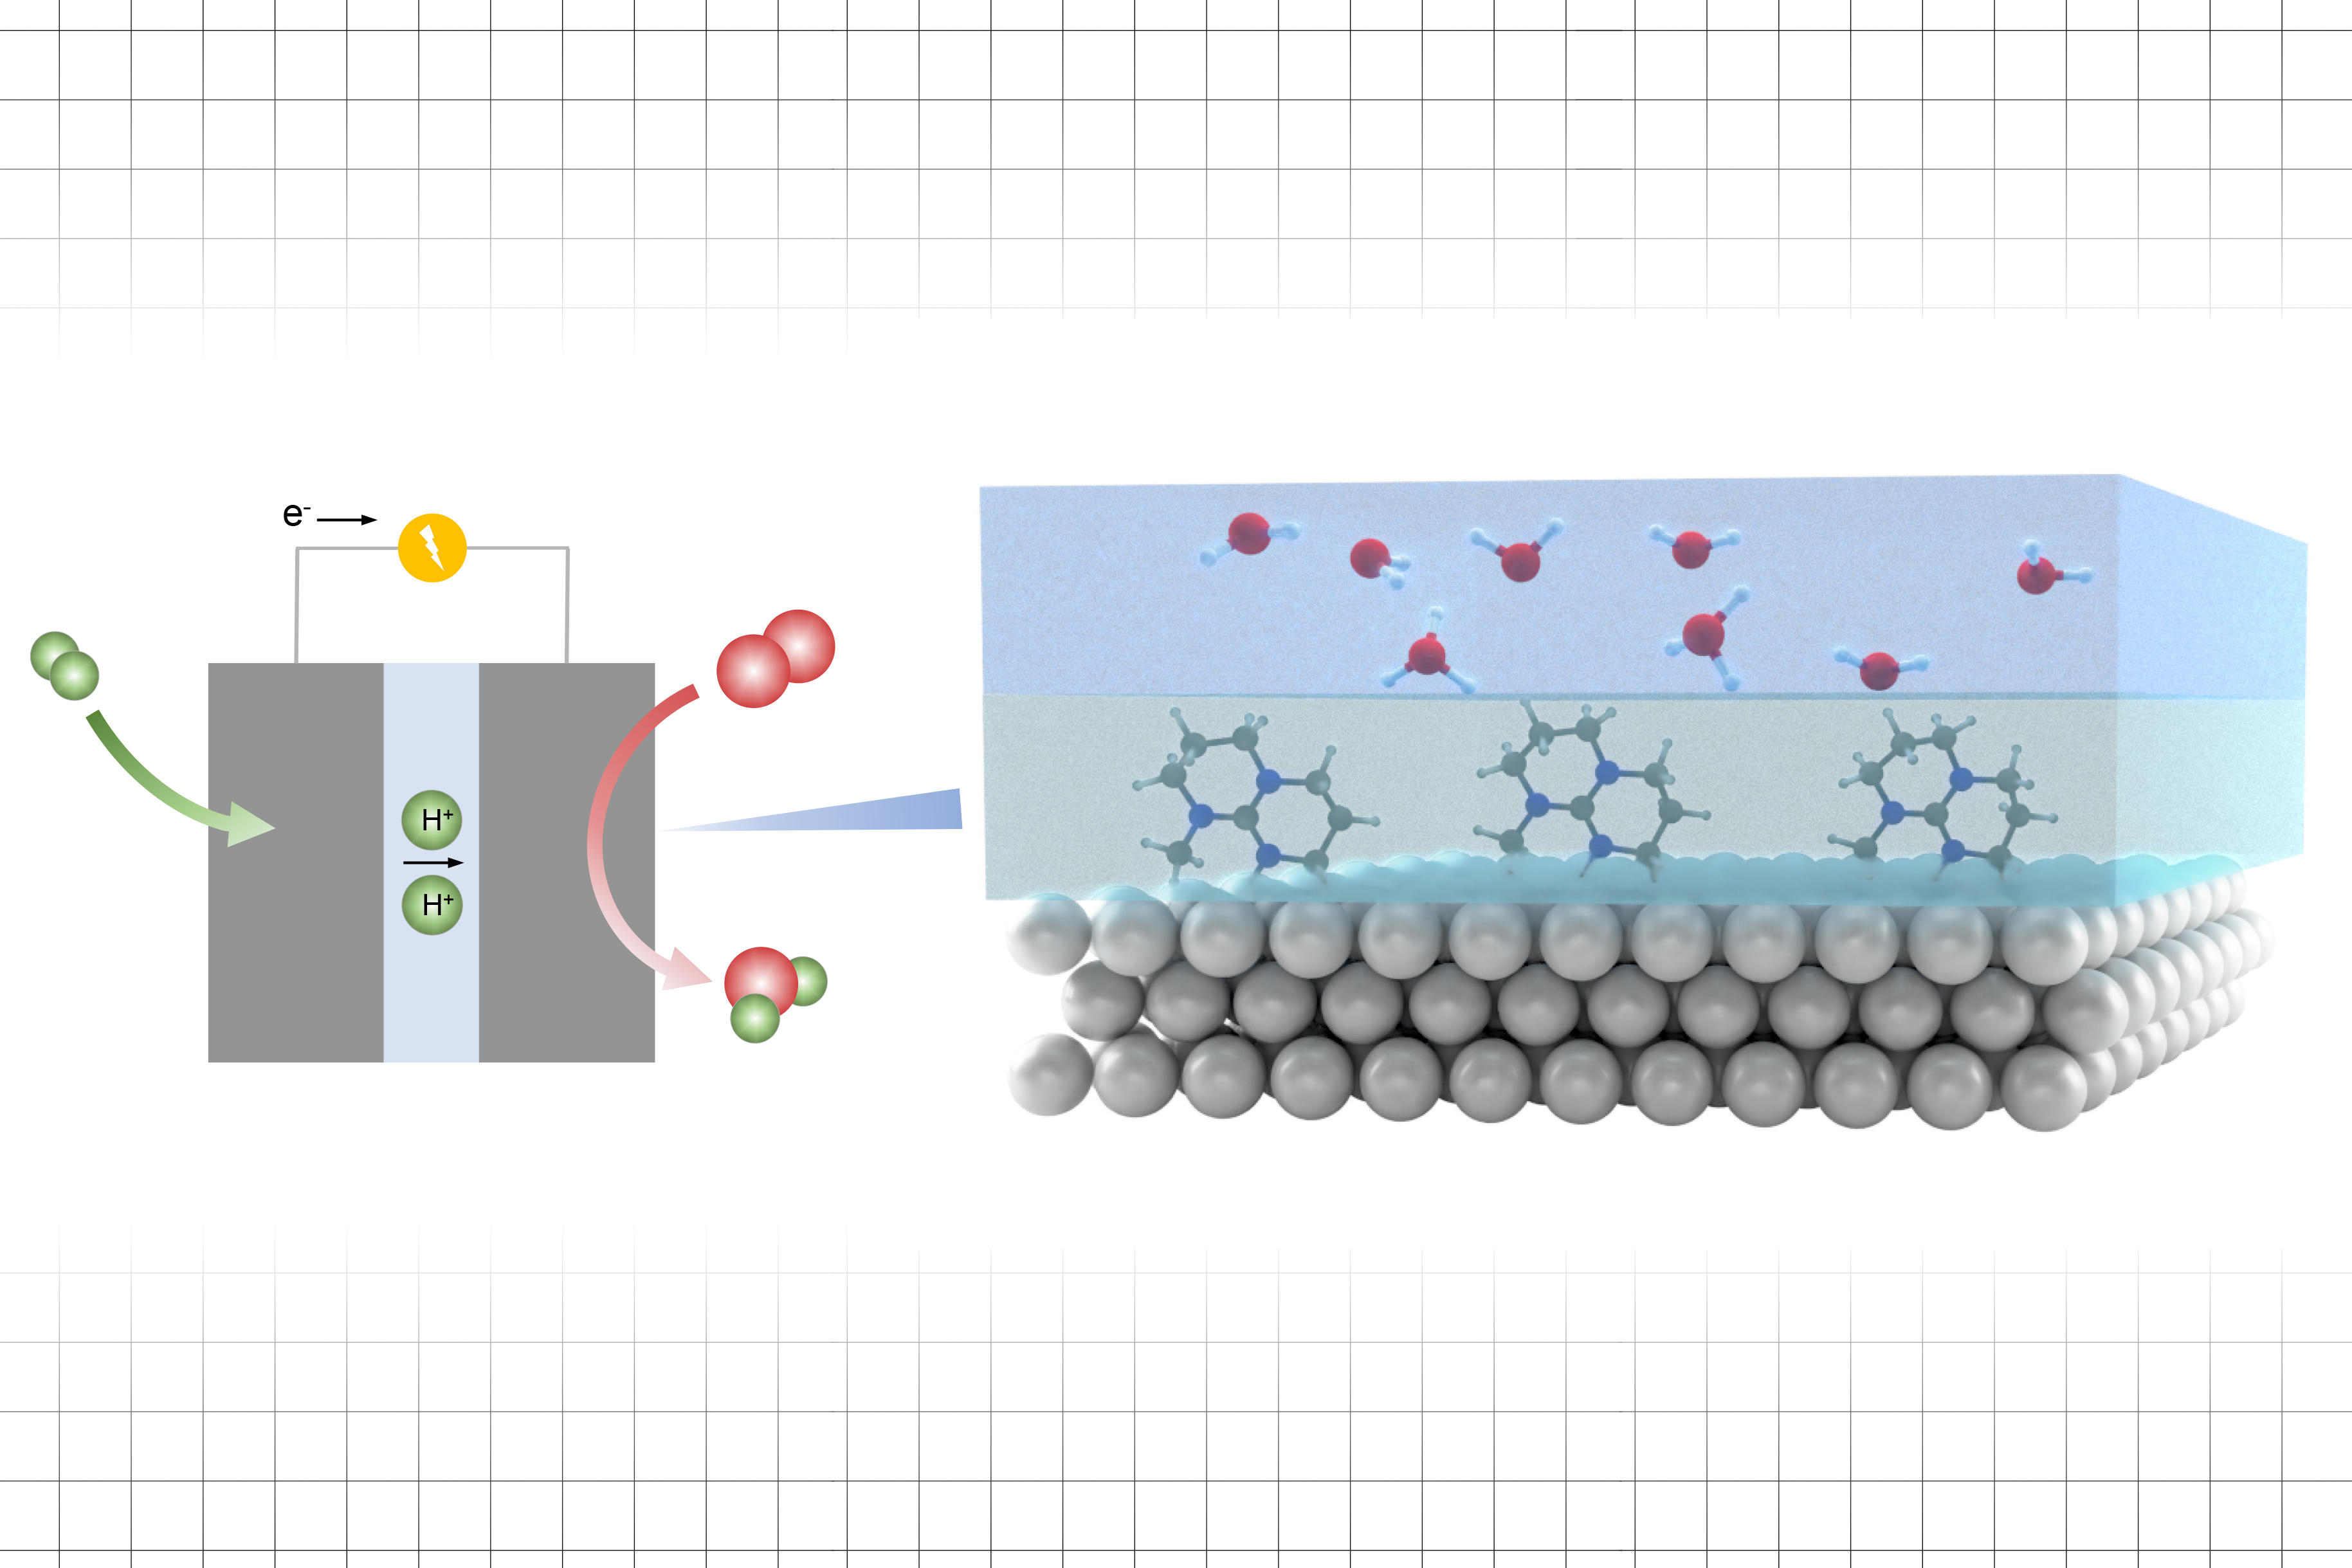 Making catalytic surfaces more active to help decarbonize fuels and chemicals